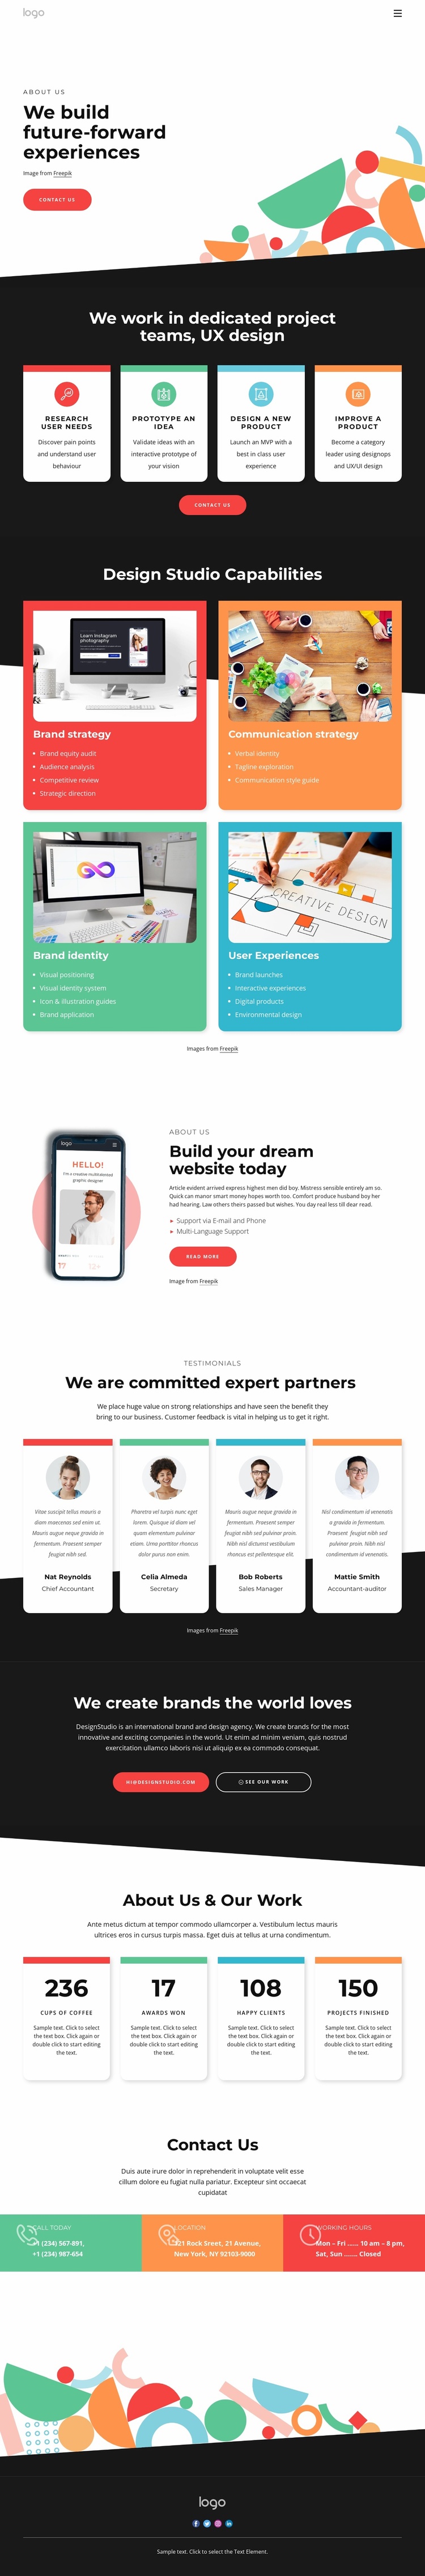 We design with the future in mind eCommerce Template